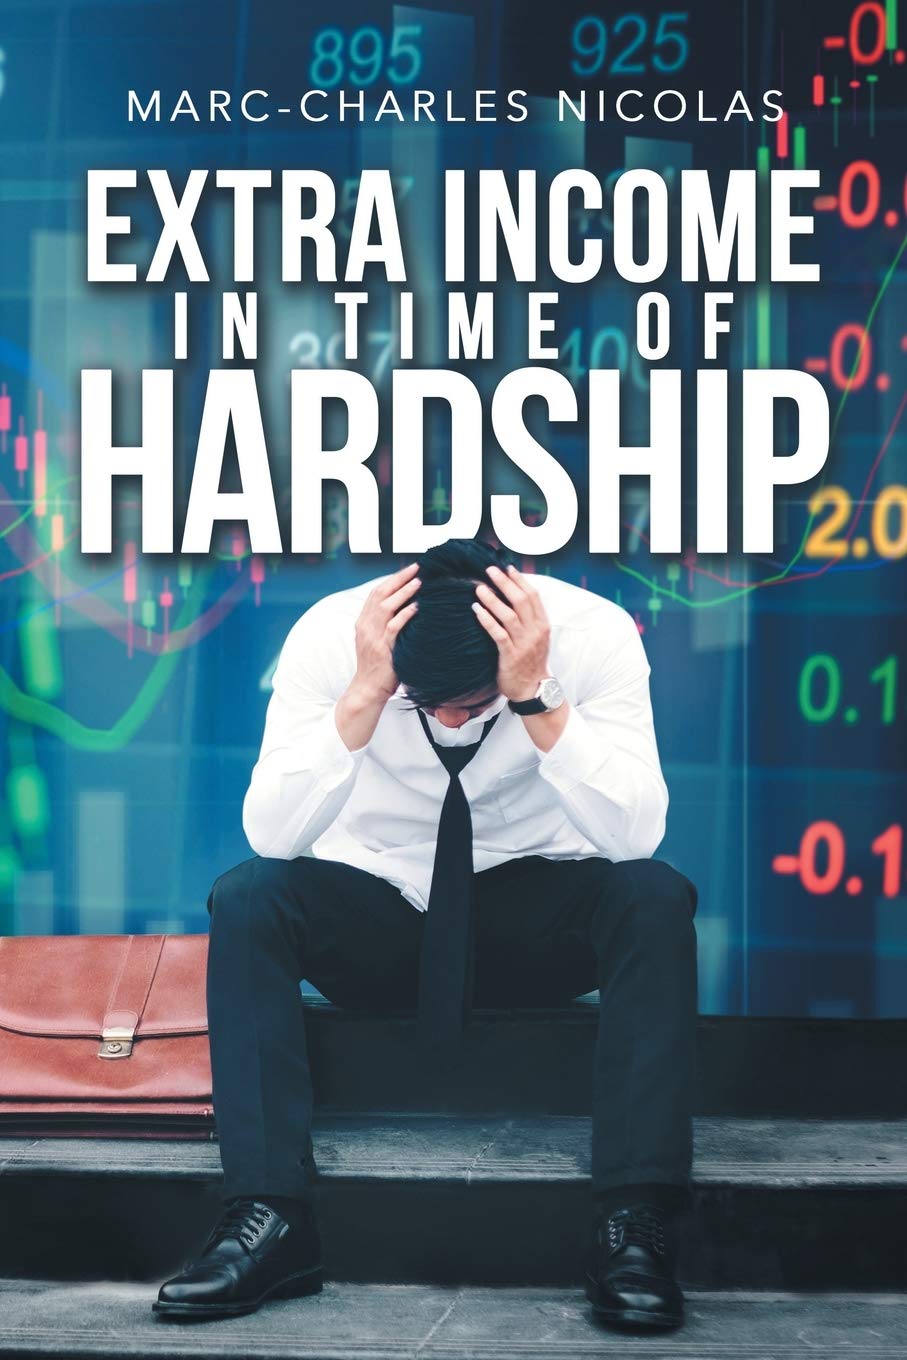 Author's Tranquility Press Supports Marc-Charles As He Shares Ways of Earning Passive Income in Extra Income in Time of Hardship